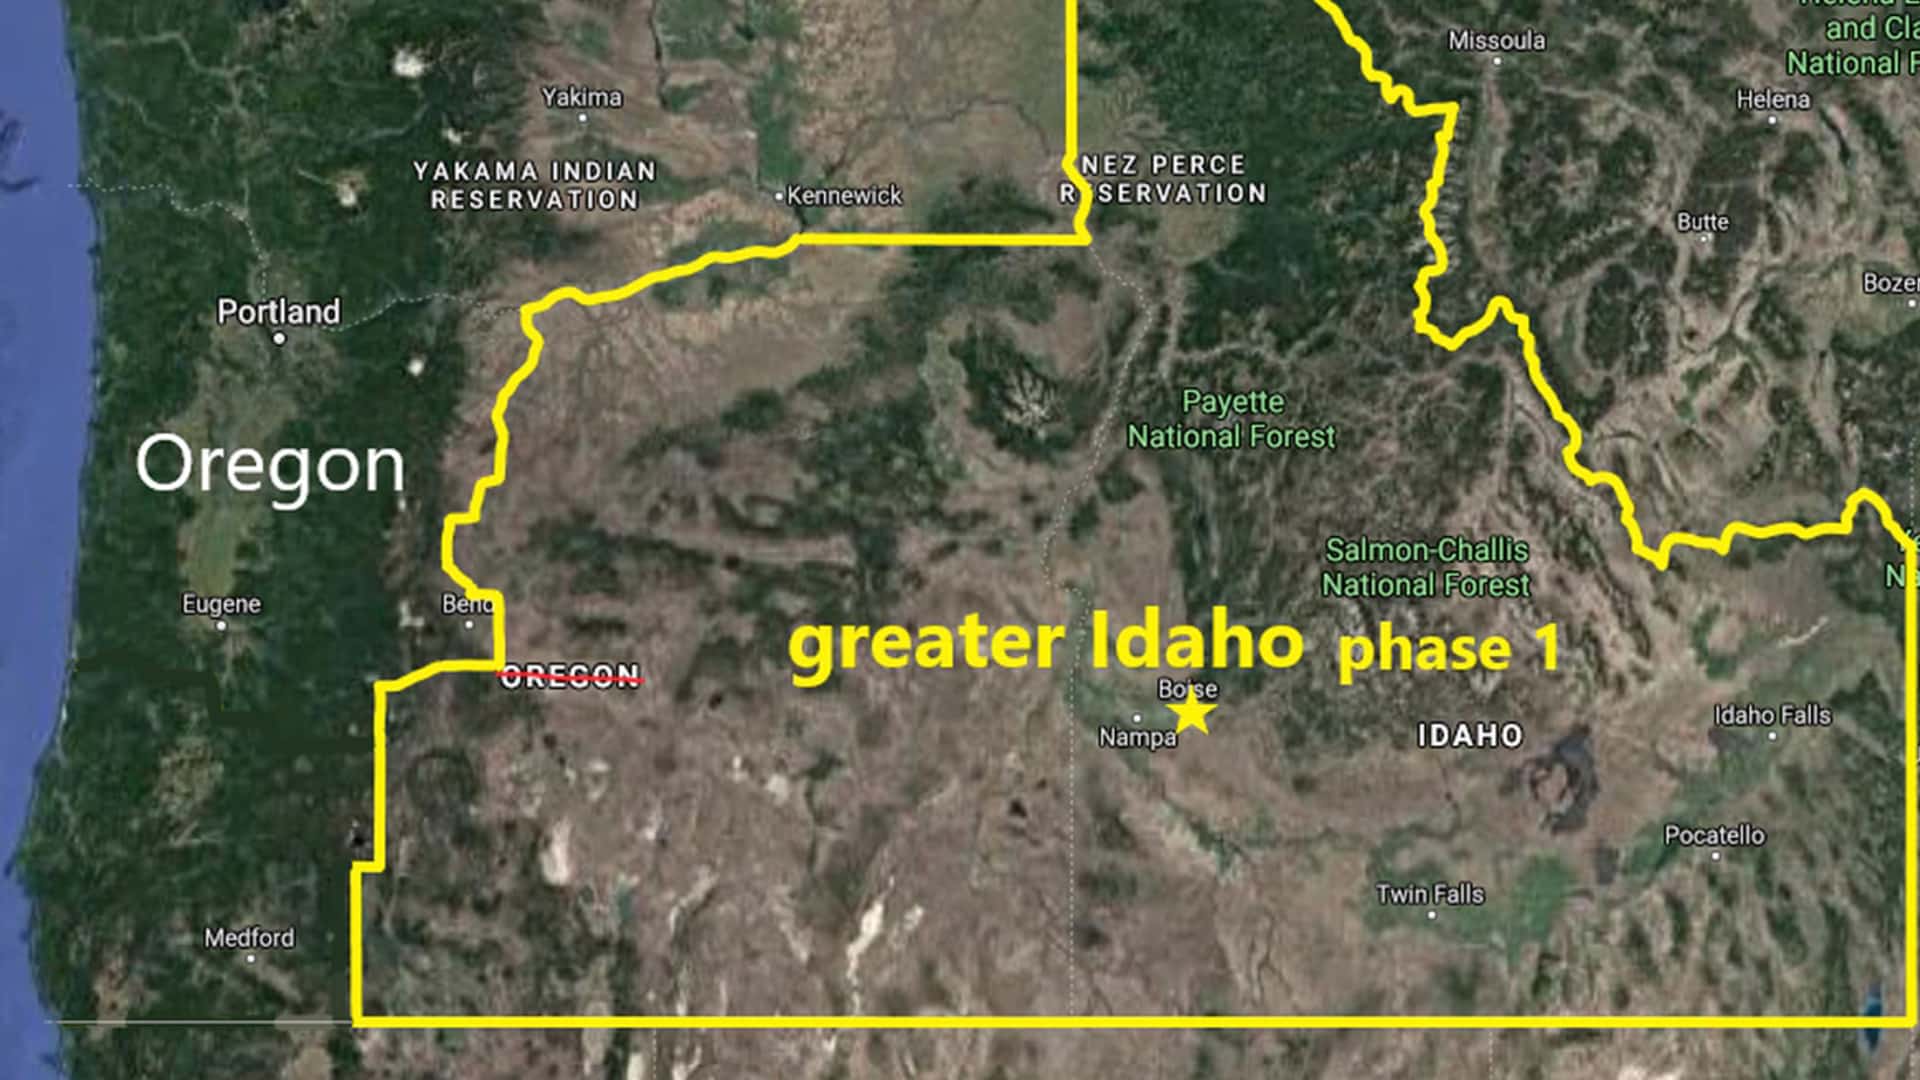 Mike Church Show- Make Idaho Great Again! Idaho Votes To Help Oregon Patriots Secede From Cult Of Death